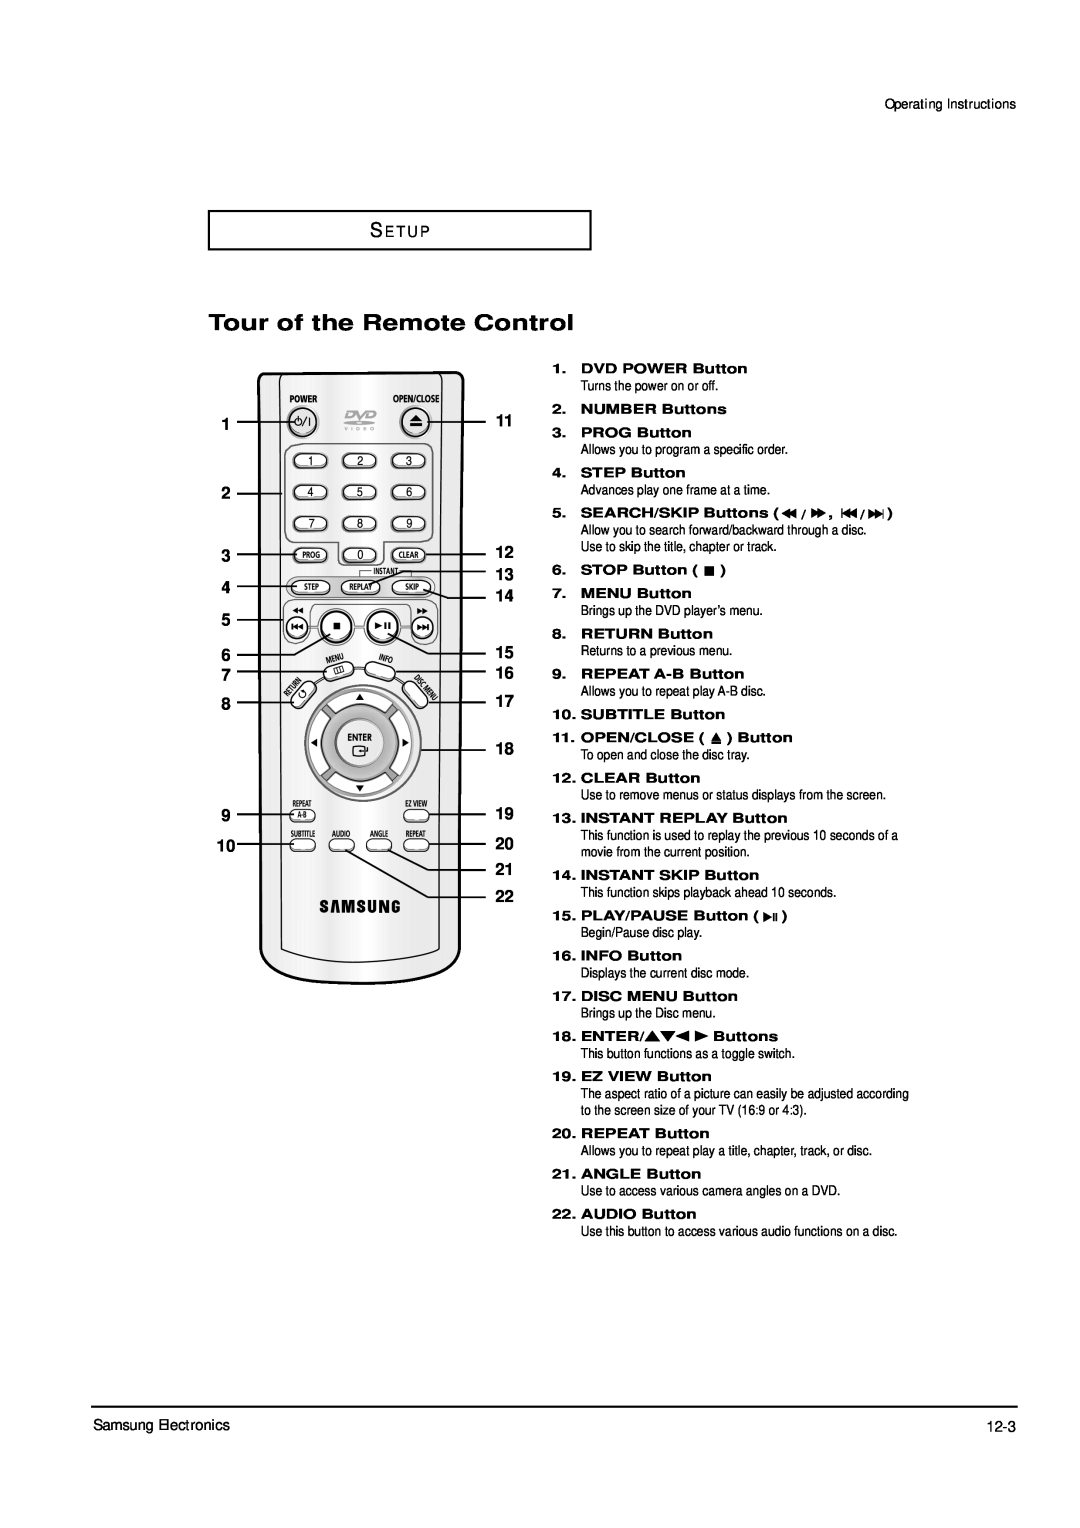 Samsung DVD-P355B/XEV Tour of the Remote Control, Operating Instructions, S E T U P, ENG-10, PROG Button, STEP Button 